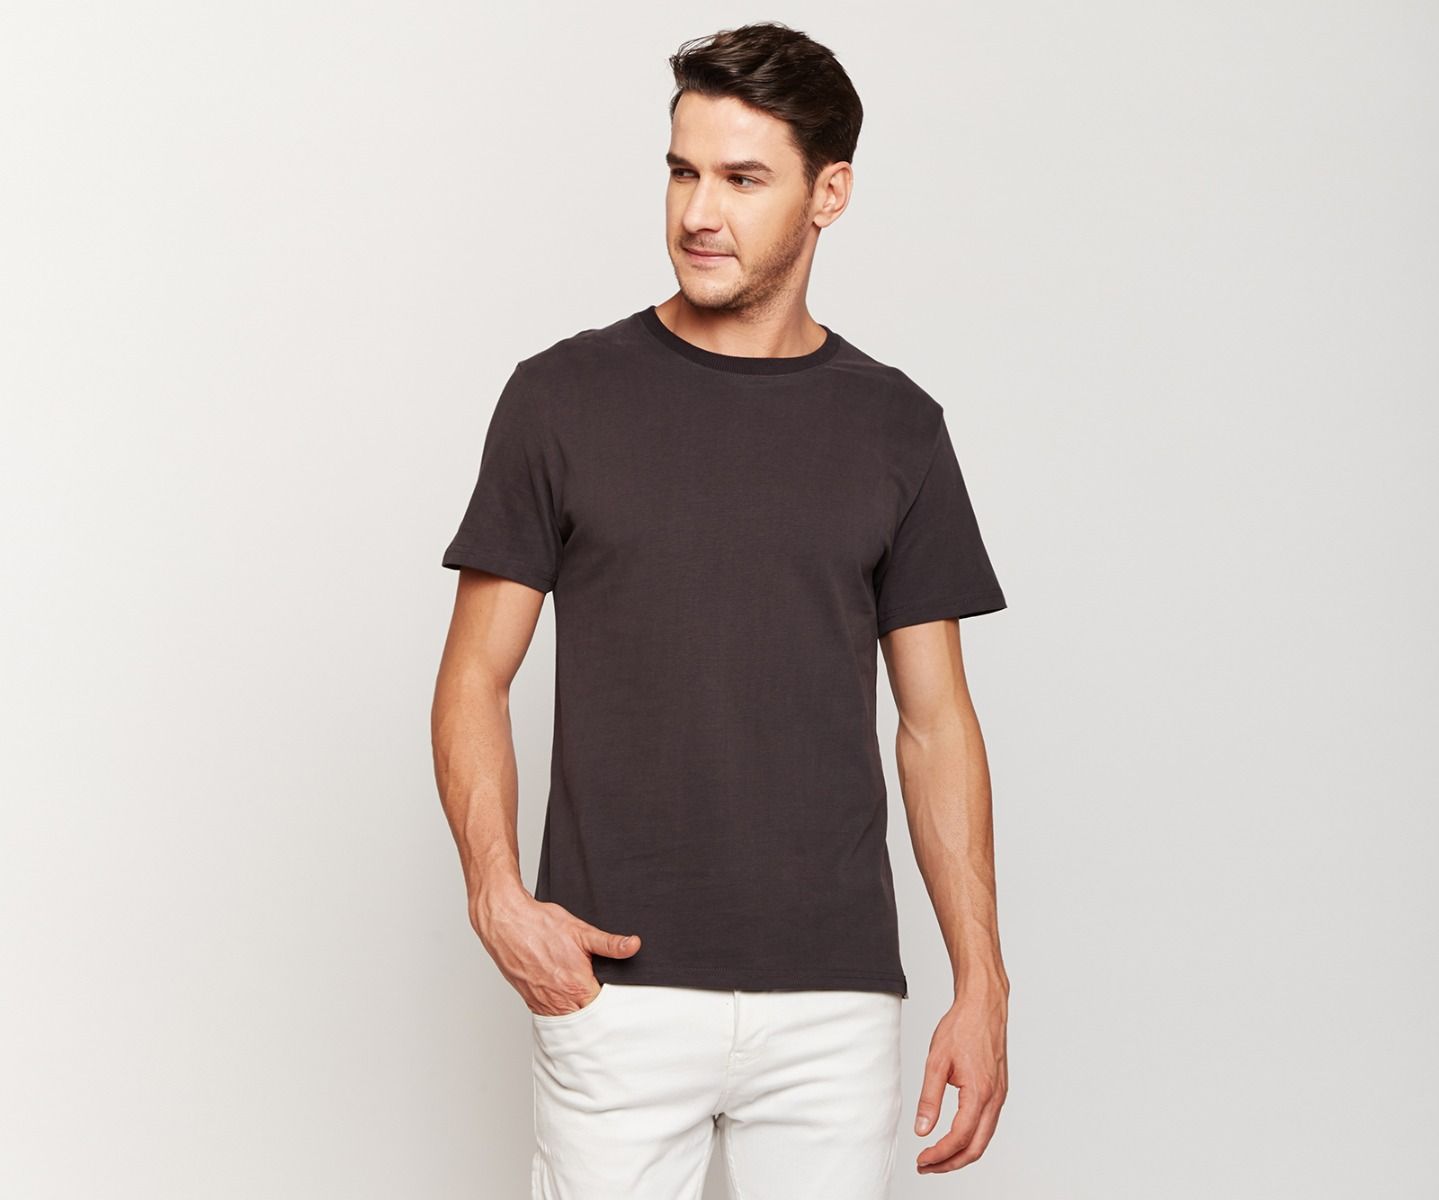 Washed Look Black Peach finish T-shirt